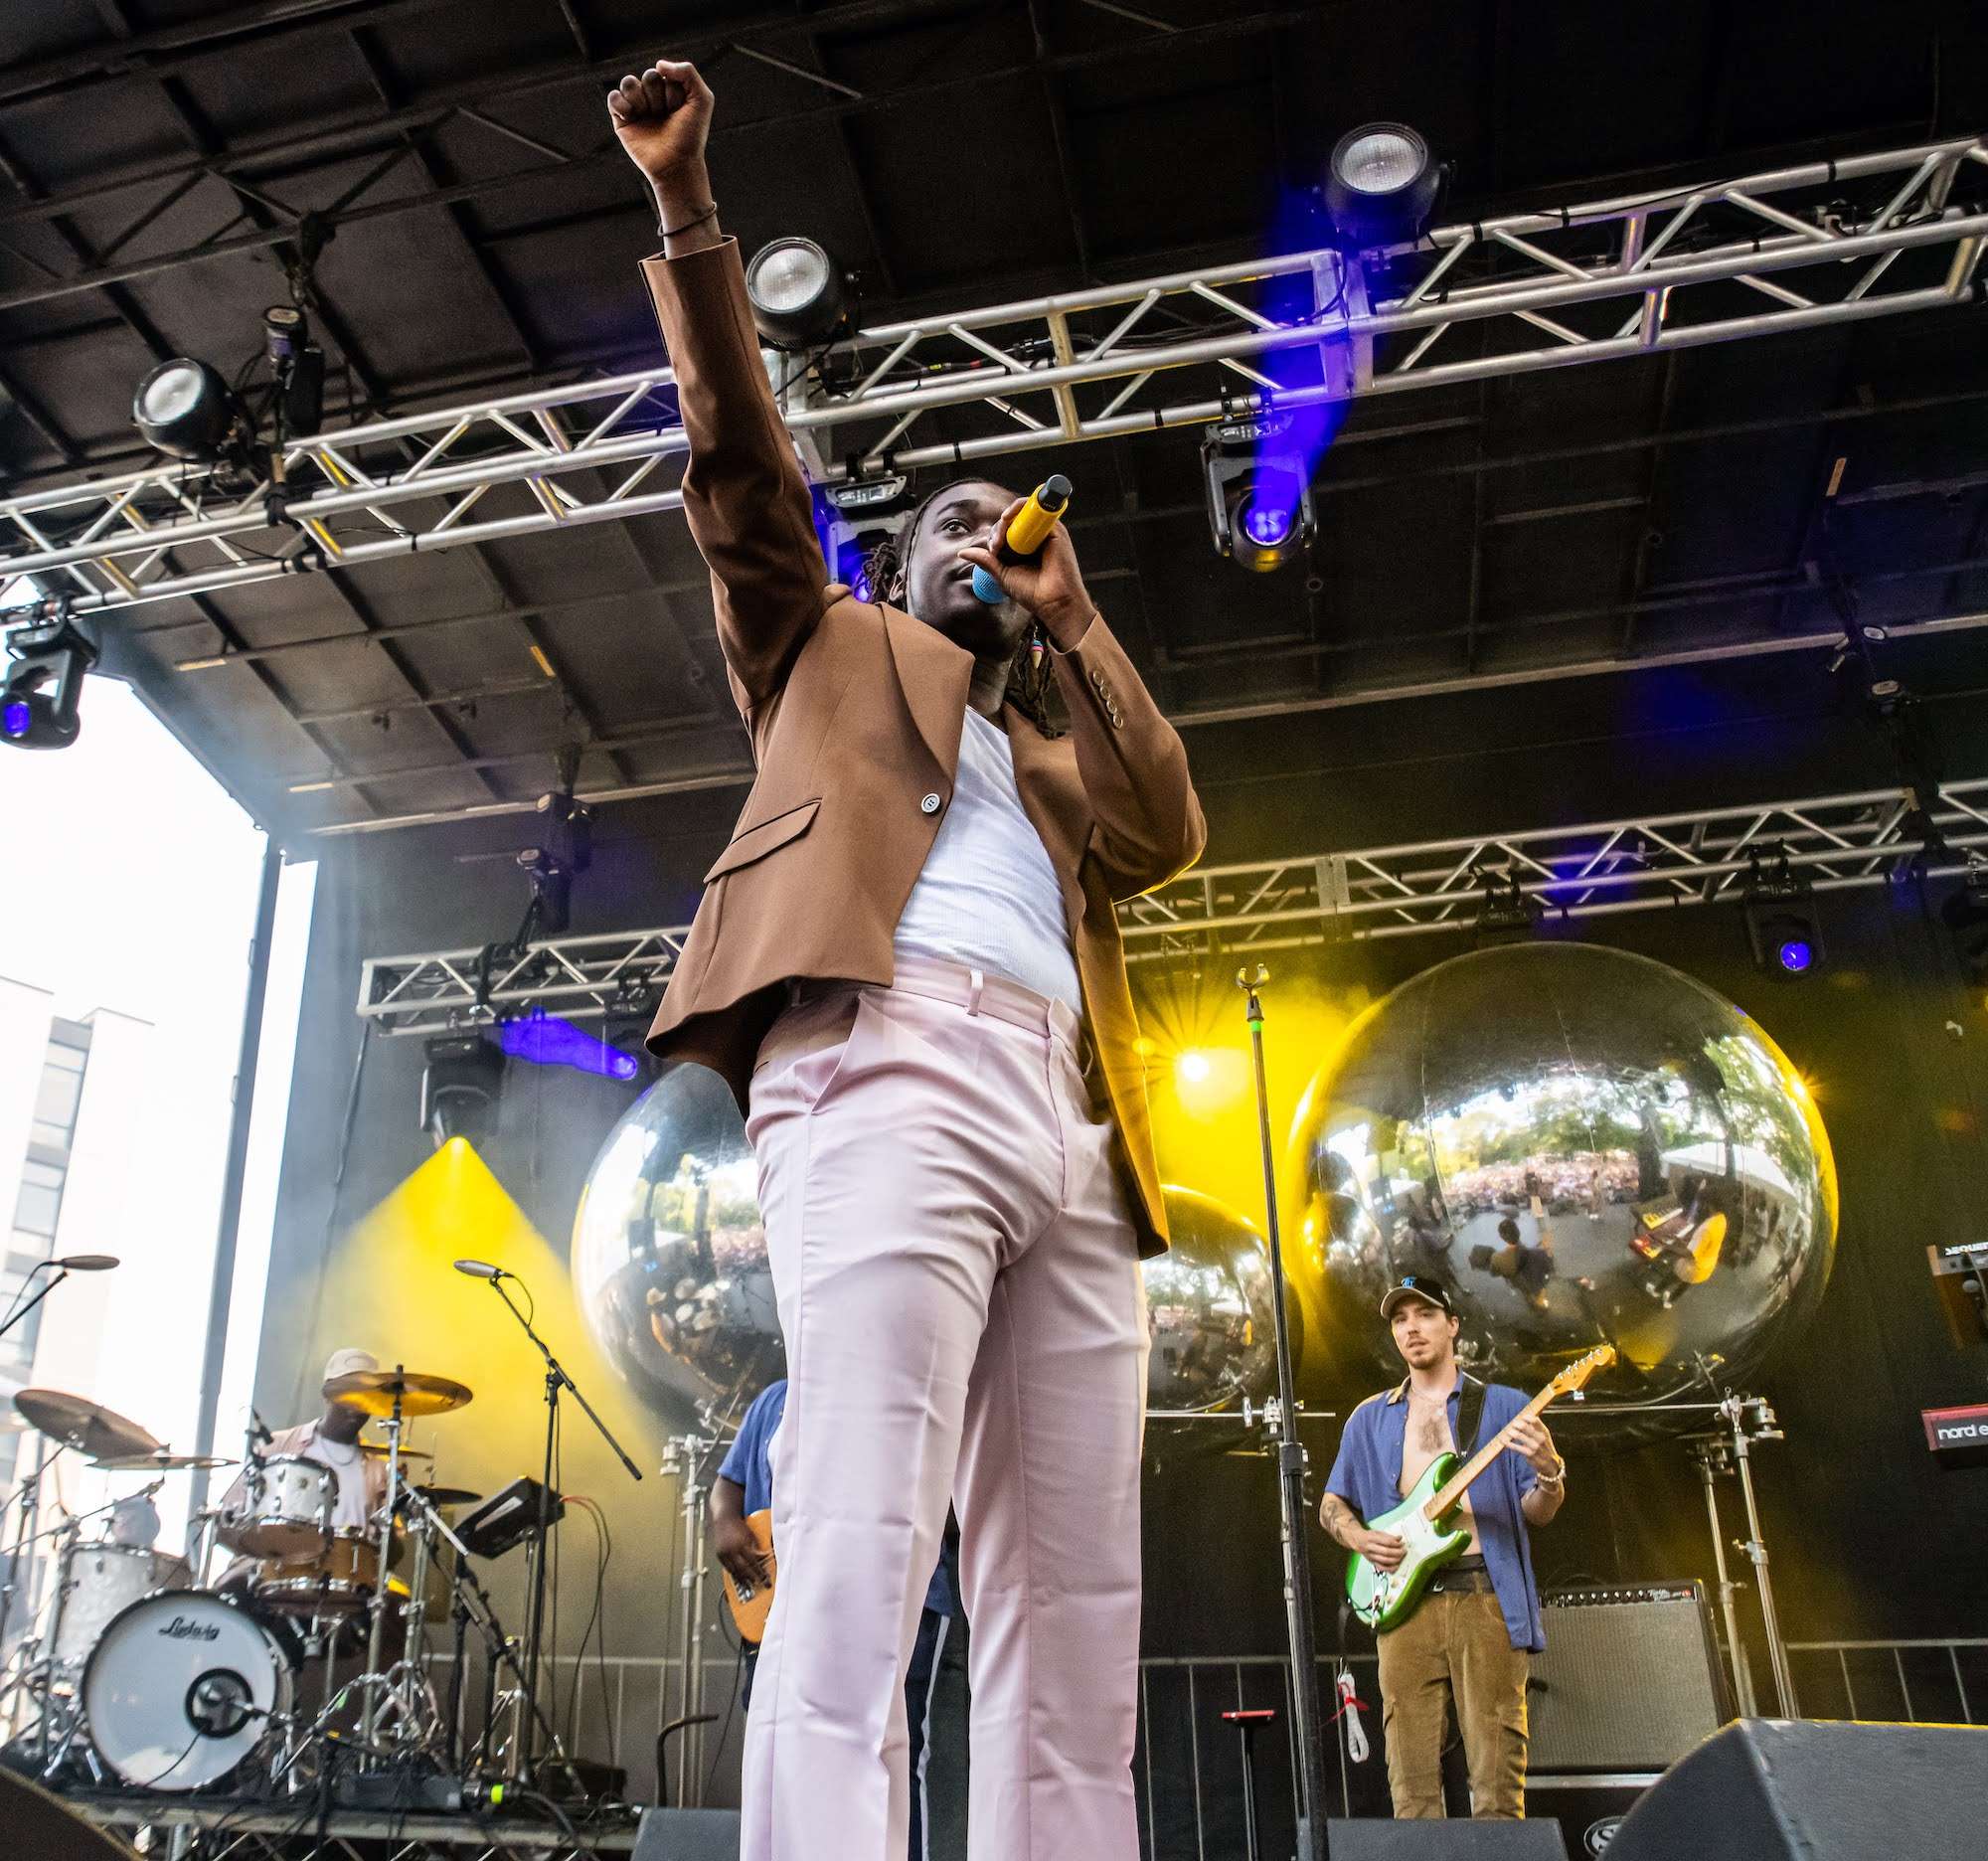 Ric Wilson Live At Pitchfork [GALLERY] 2